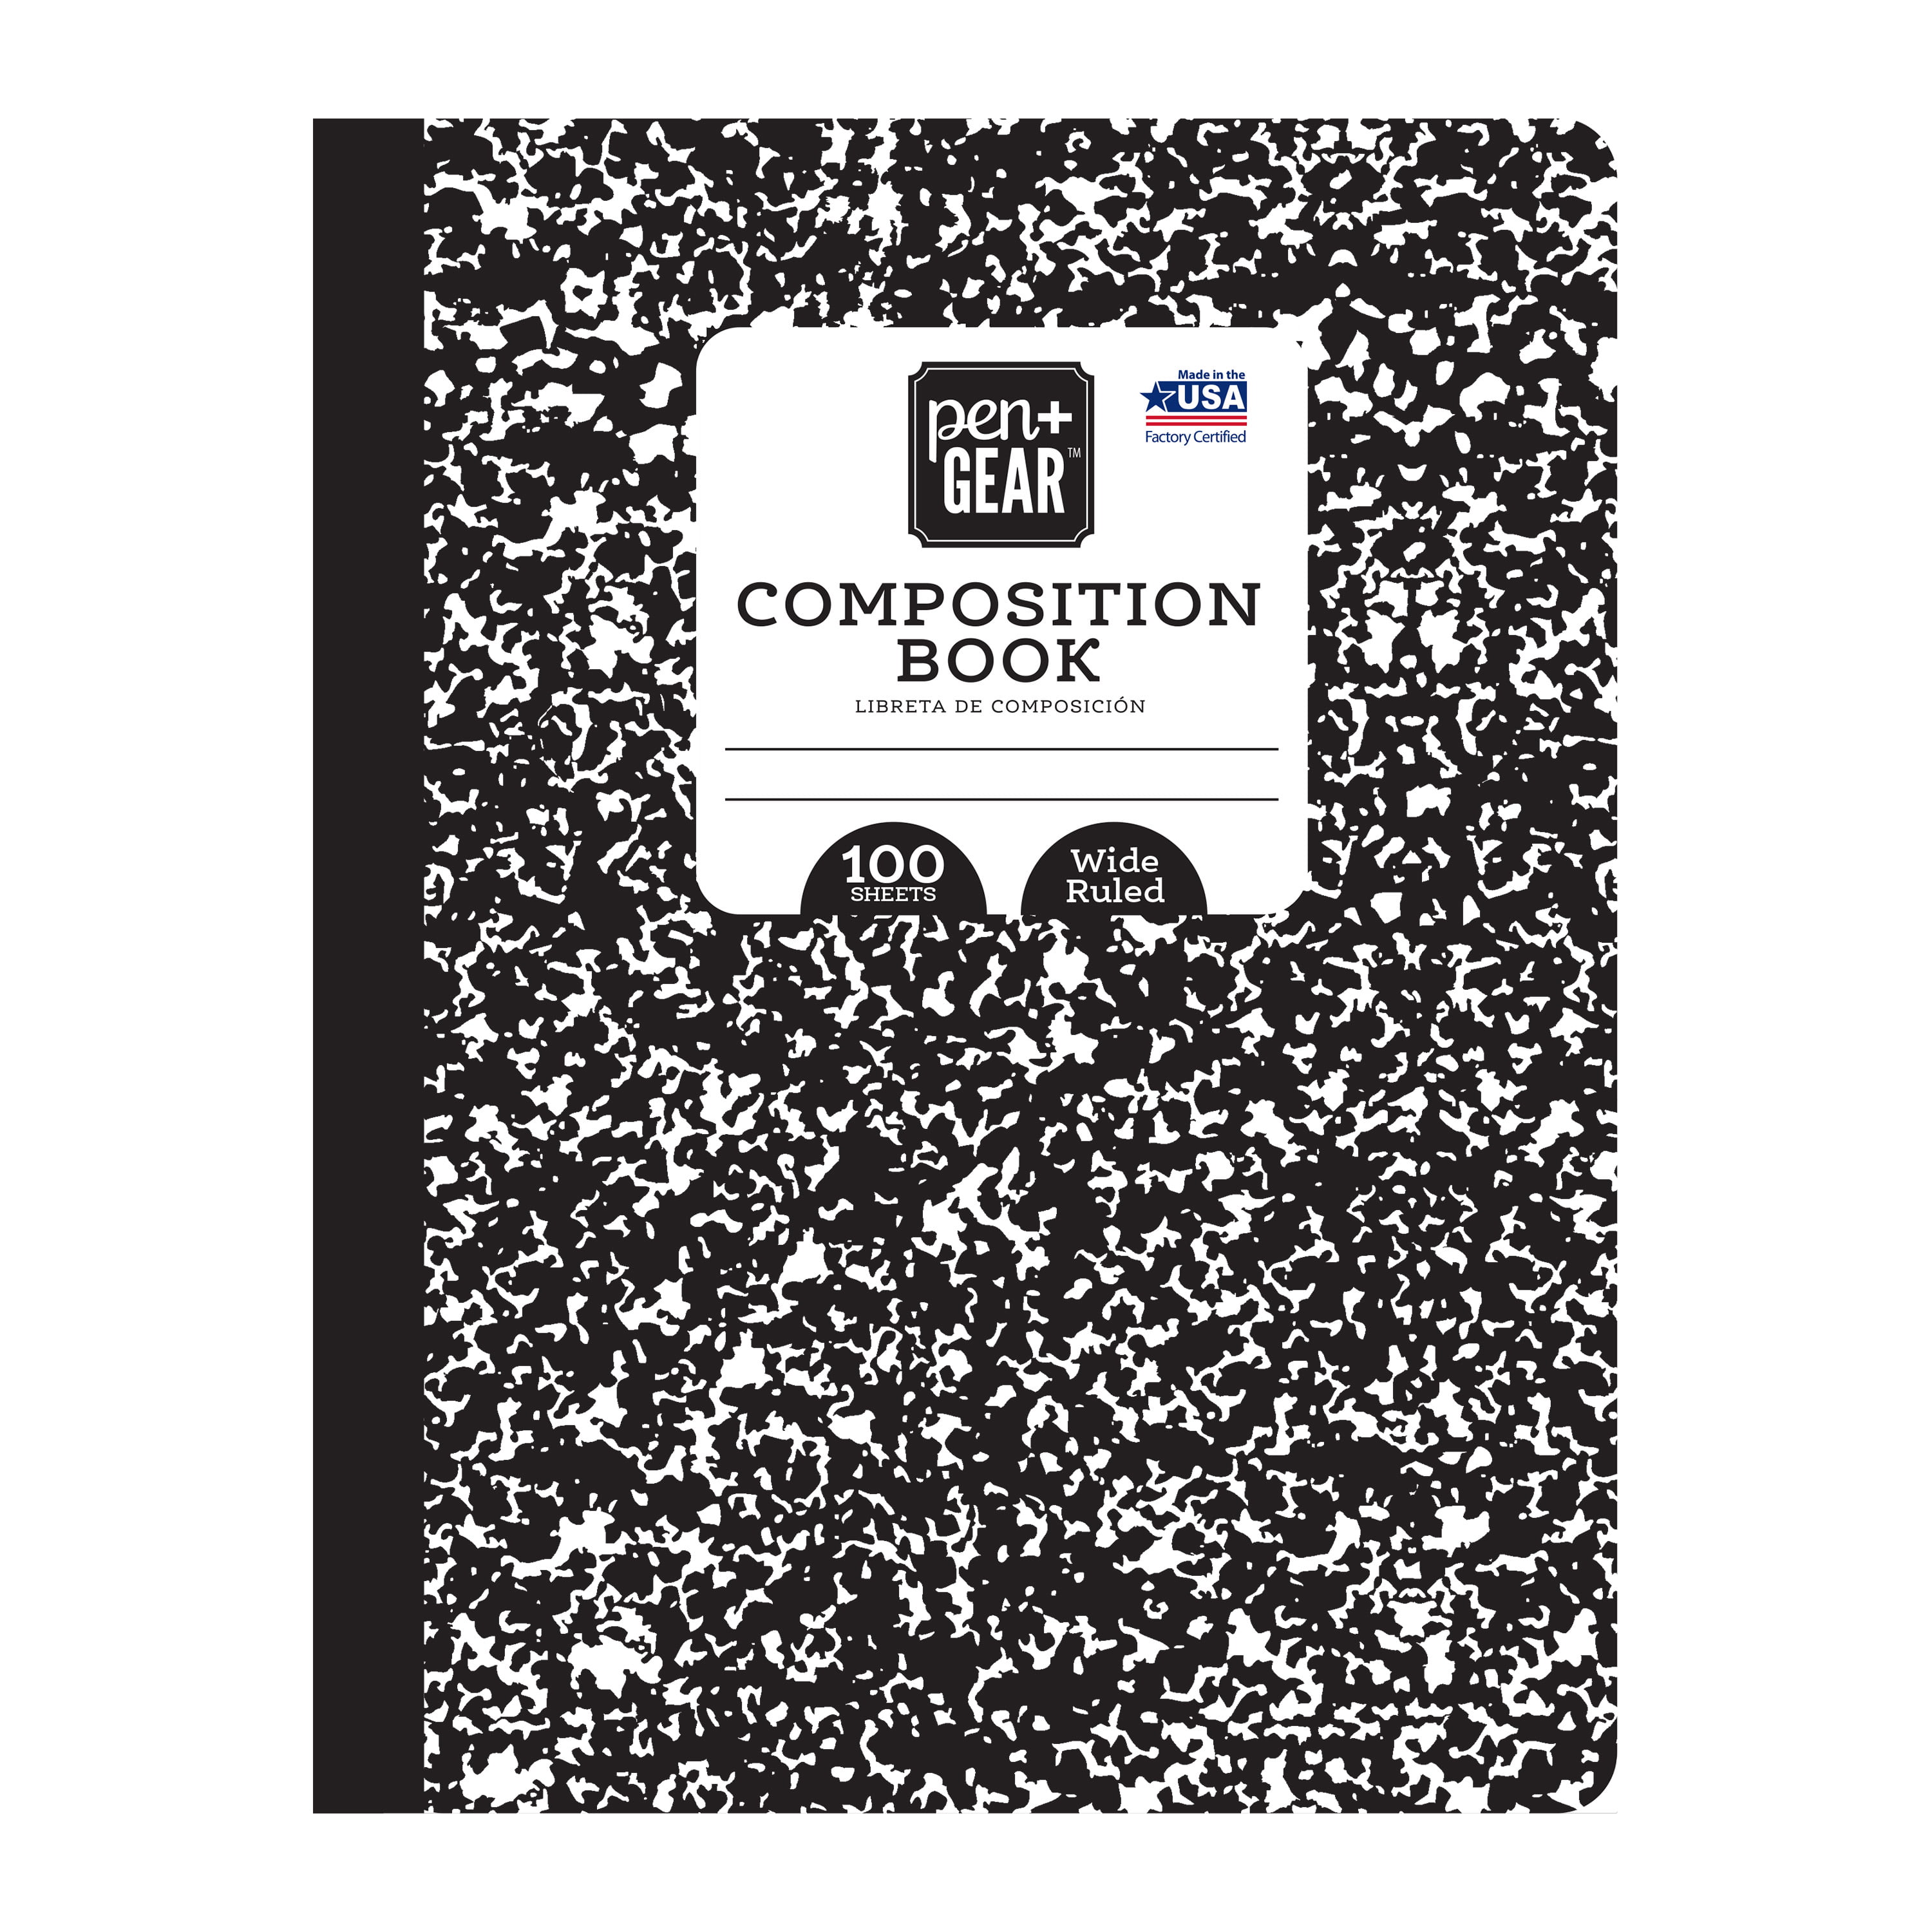 Pen + Gear Composition Book, Wide Ruled, 100 Pages, 9.75" x 7.5", Walmart.com $0.50 + Free Store pickup